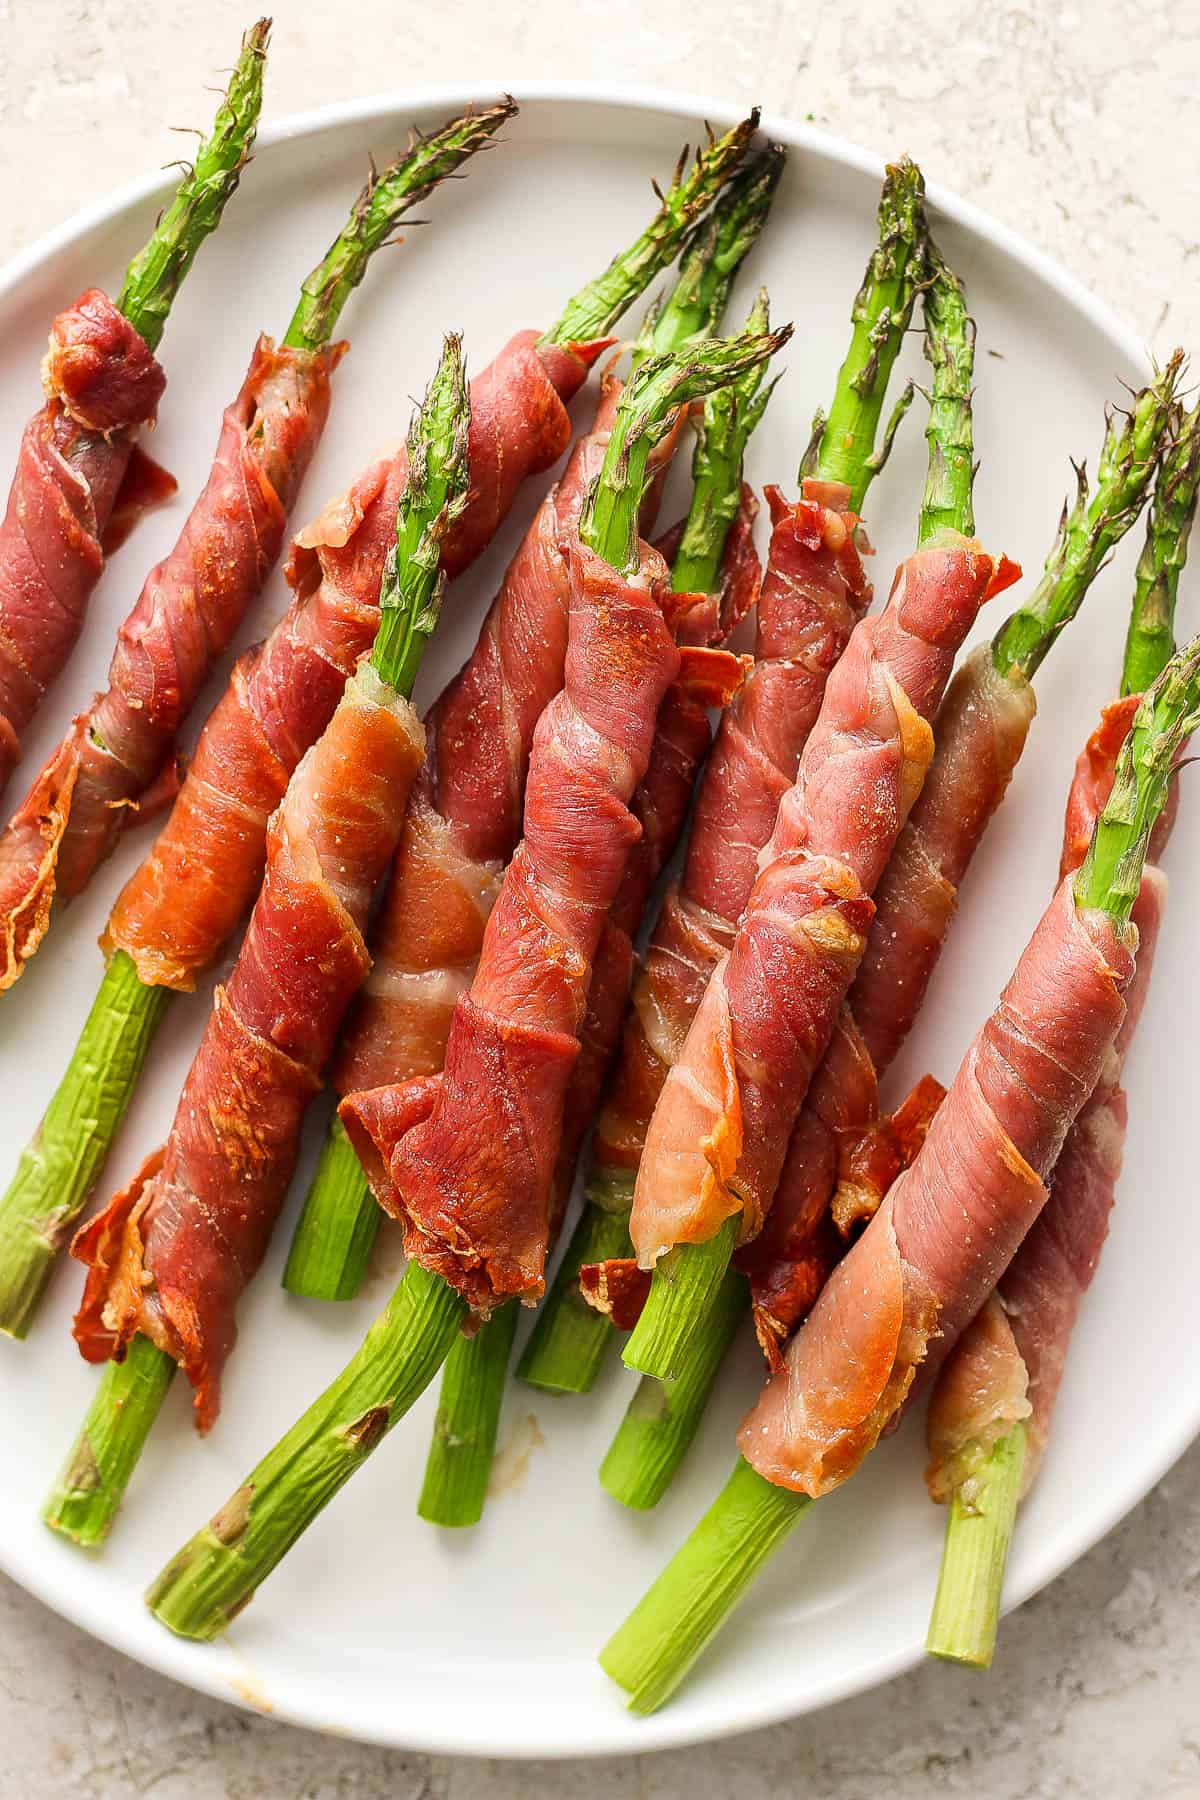 Prosciutto wrapped asparagus on a white plate.